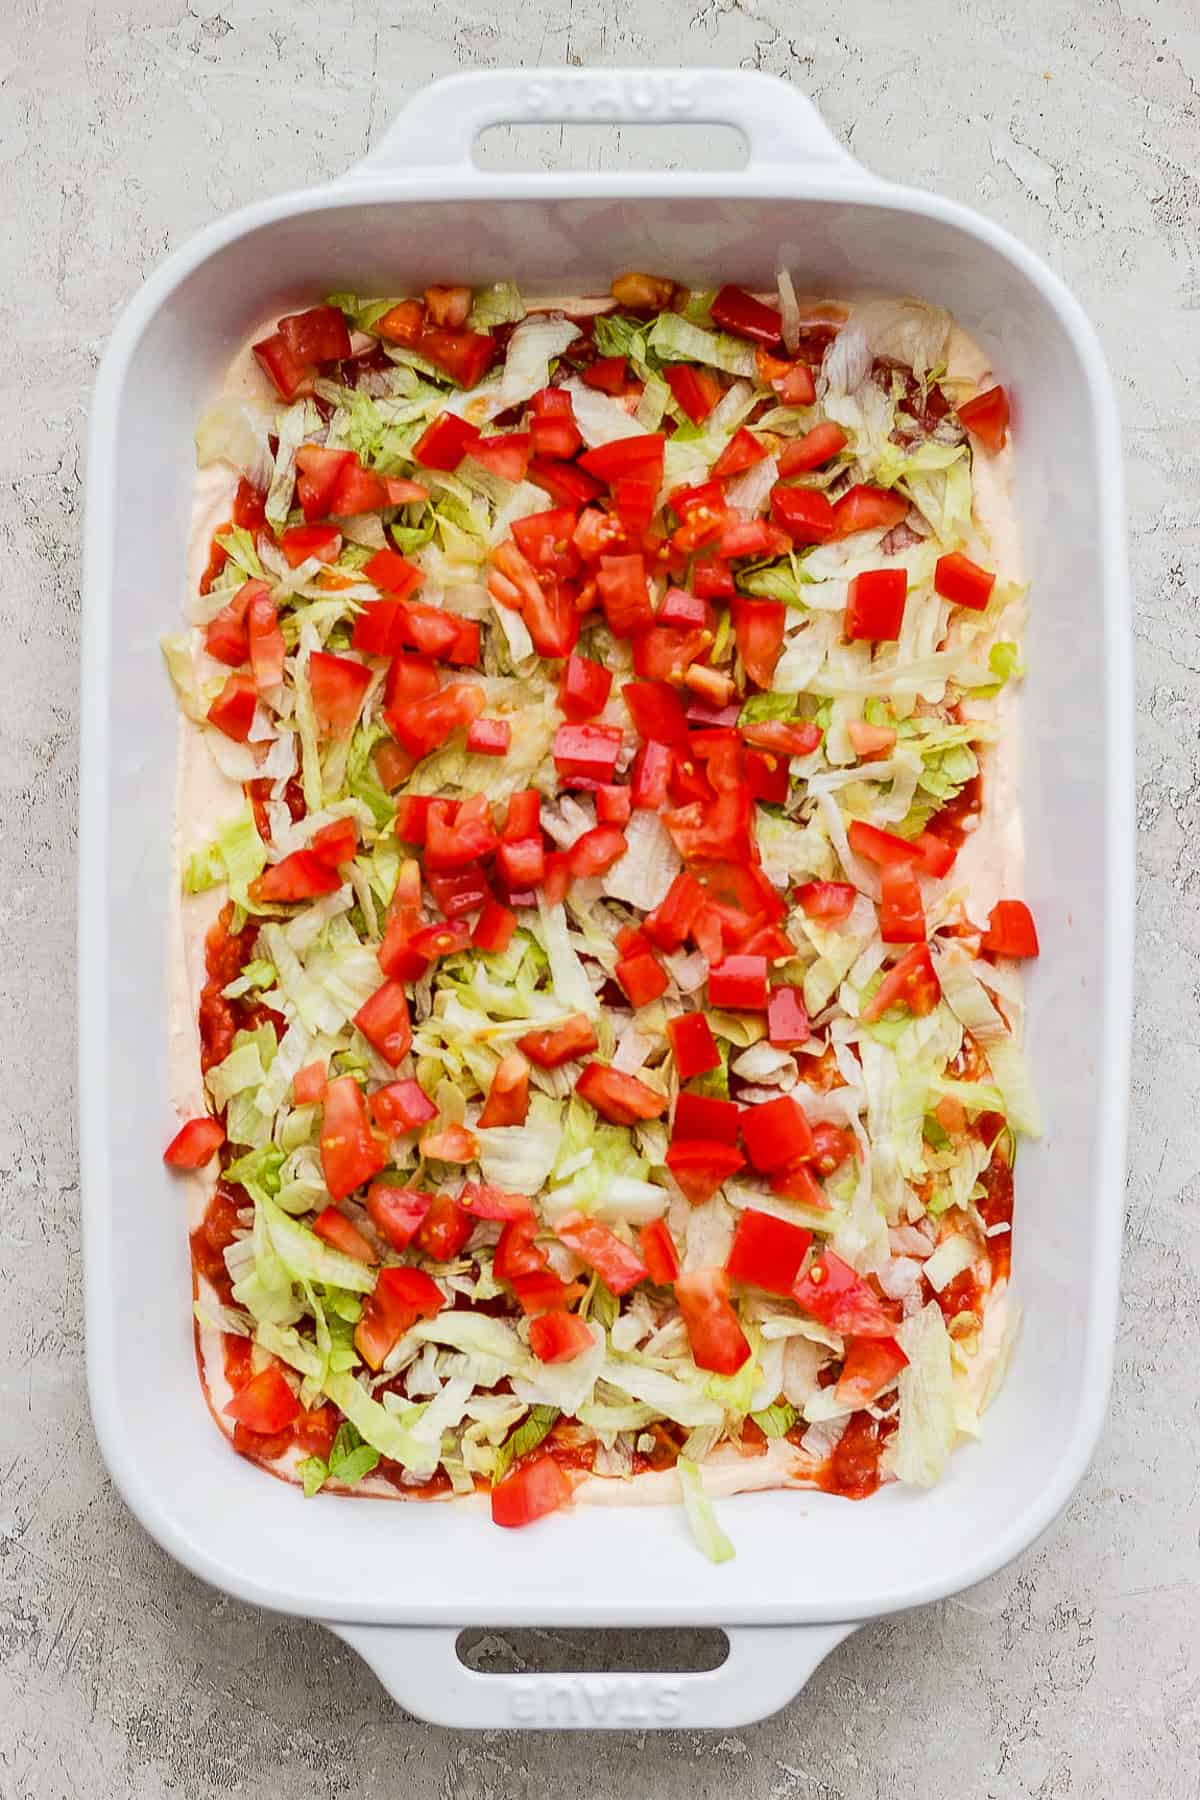 Lettuce and tomatoes in a baking dish of taco dip.